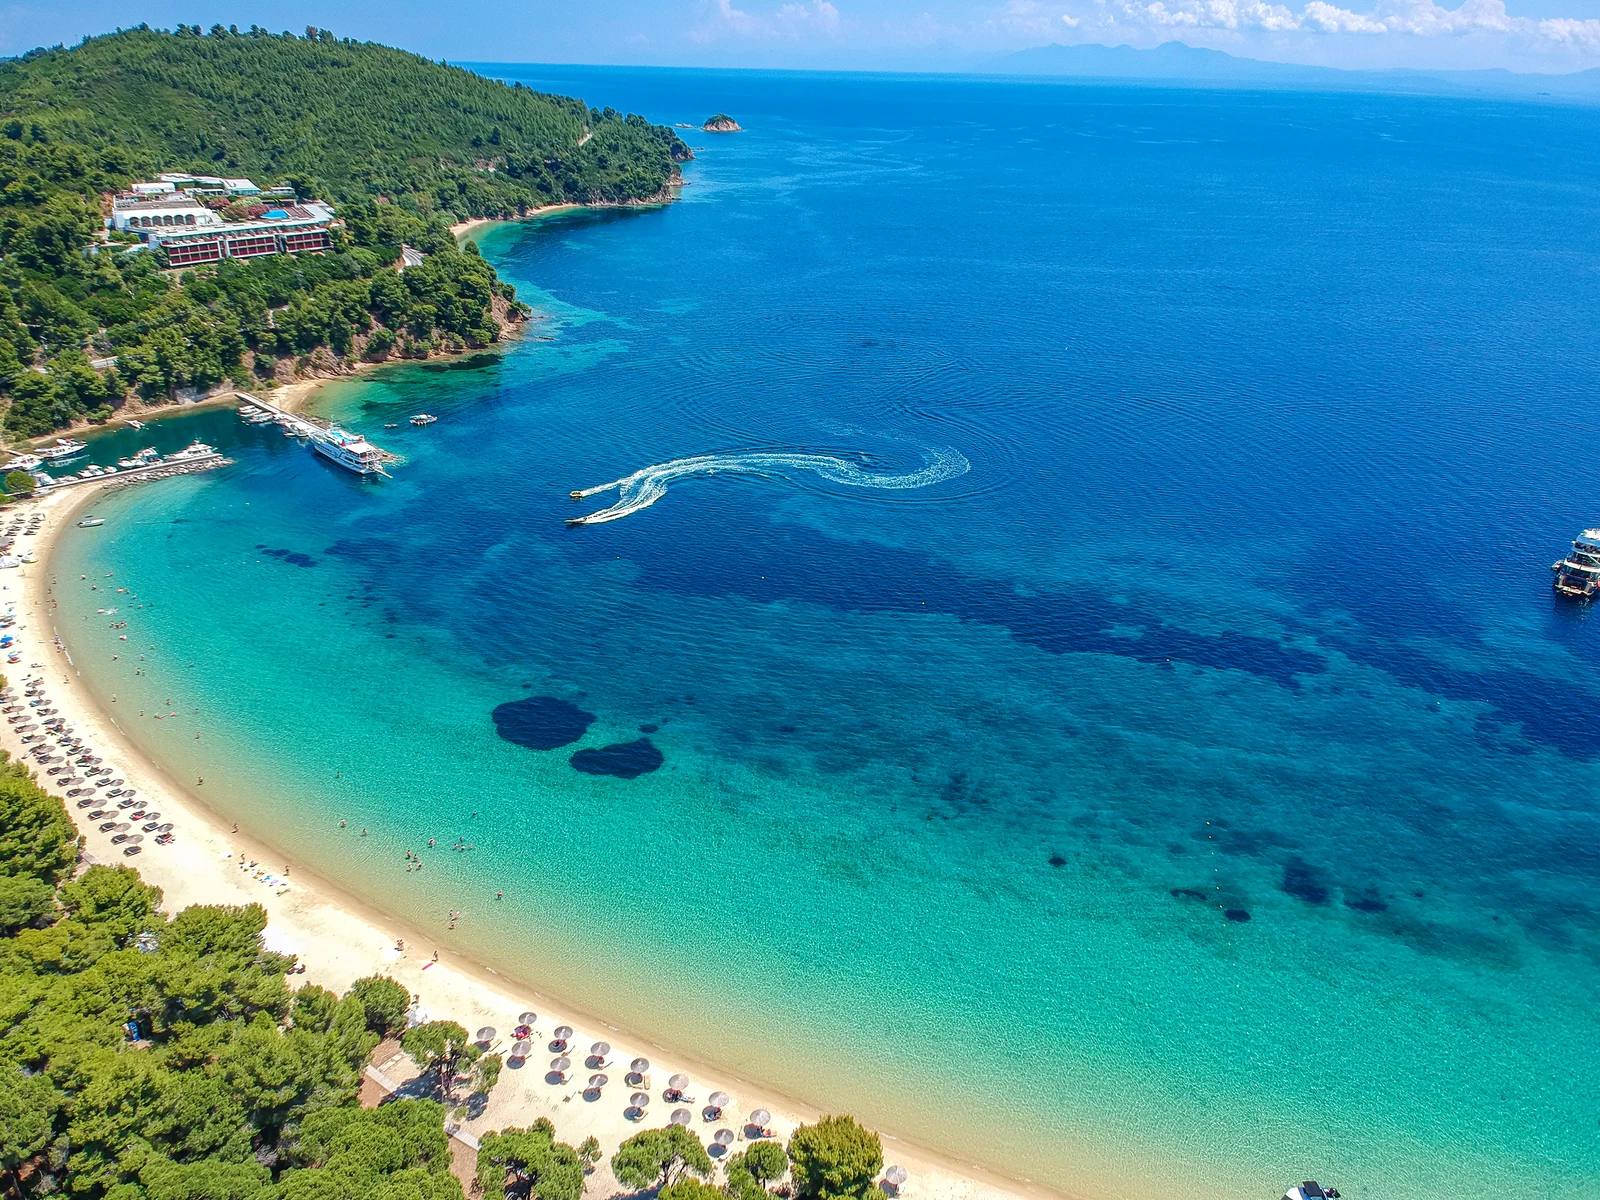 Drone view of a beautiful beach at Skiathos Island, one of the best islands in Greece to visit, where sunloungers are perfectly lined on shore, few docked and sailing ships, and tourists enjoying a banana boat ride on crystal clear water